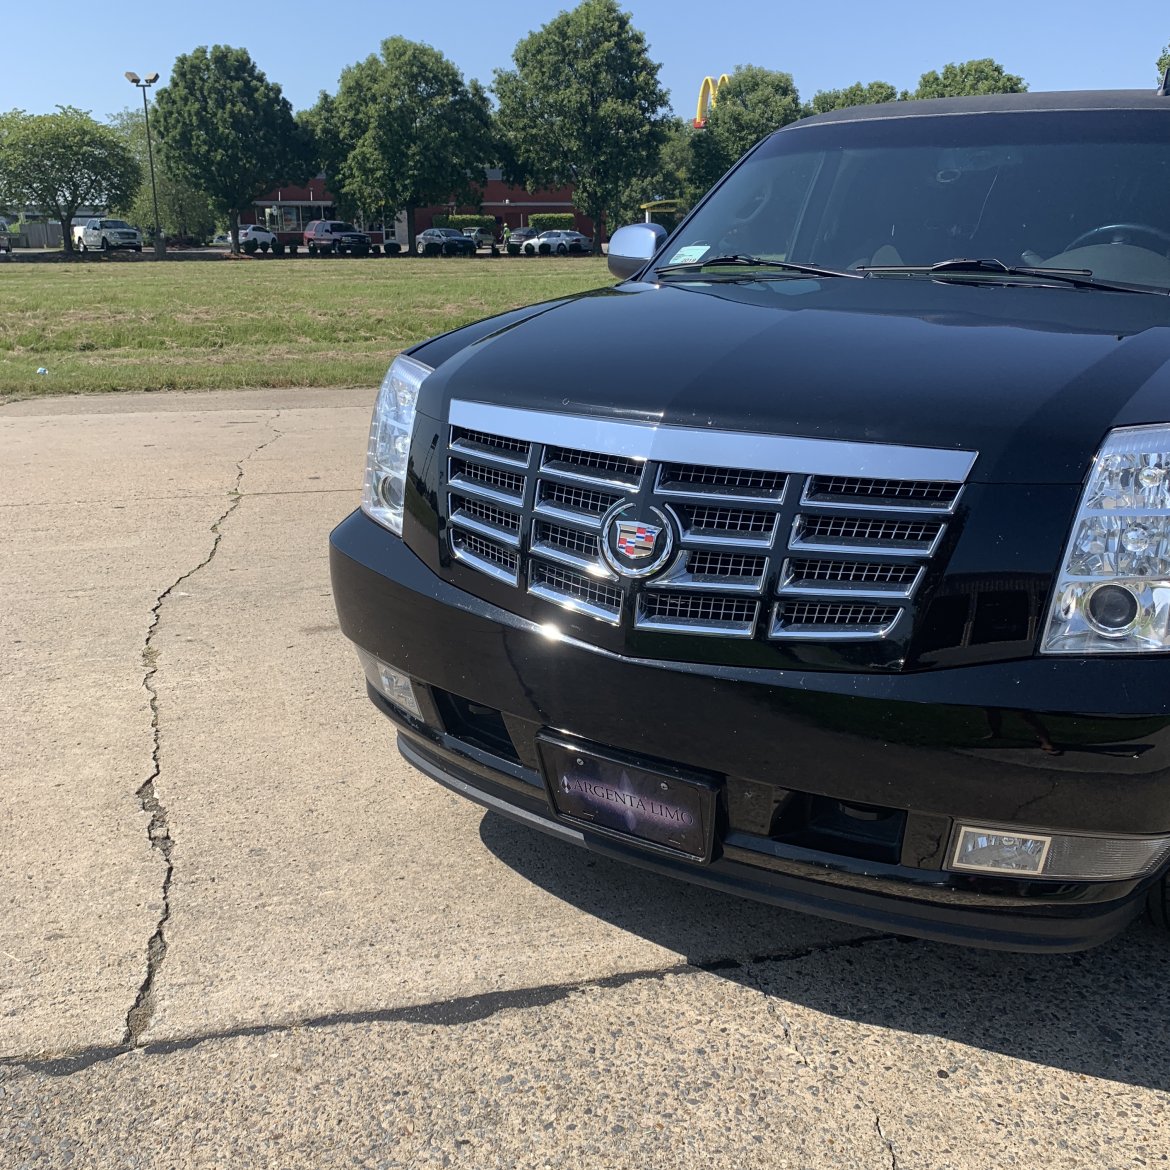 SUV Stretch for sale: 2008 Chevrolet Suburban 200&quot; by Executive Coach Builders